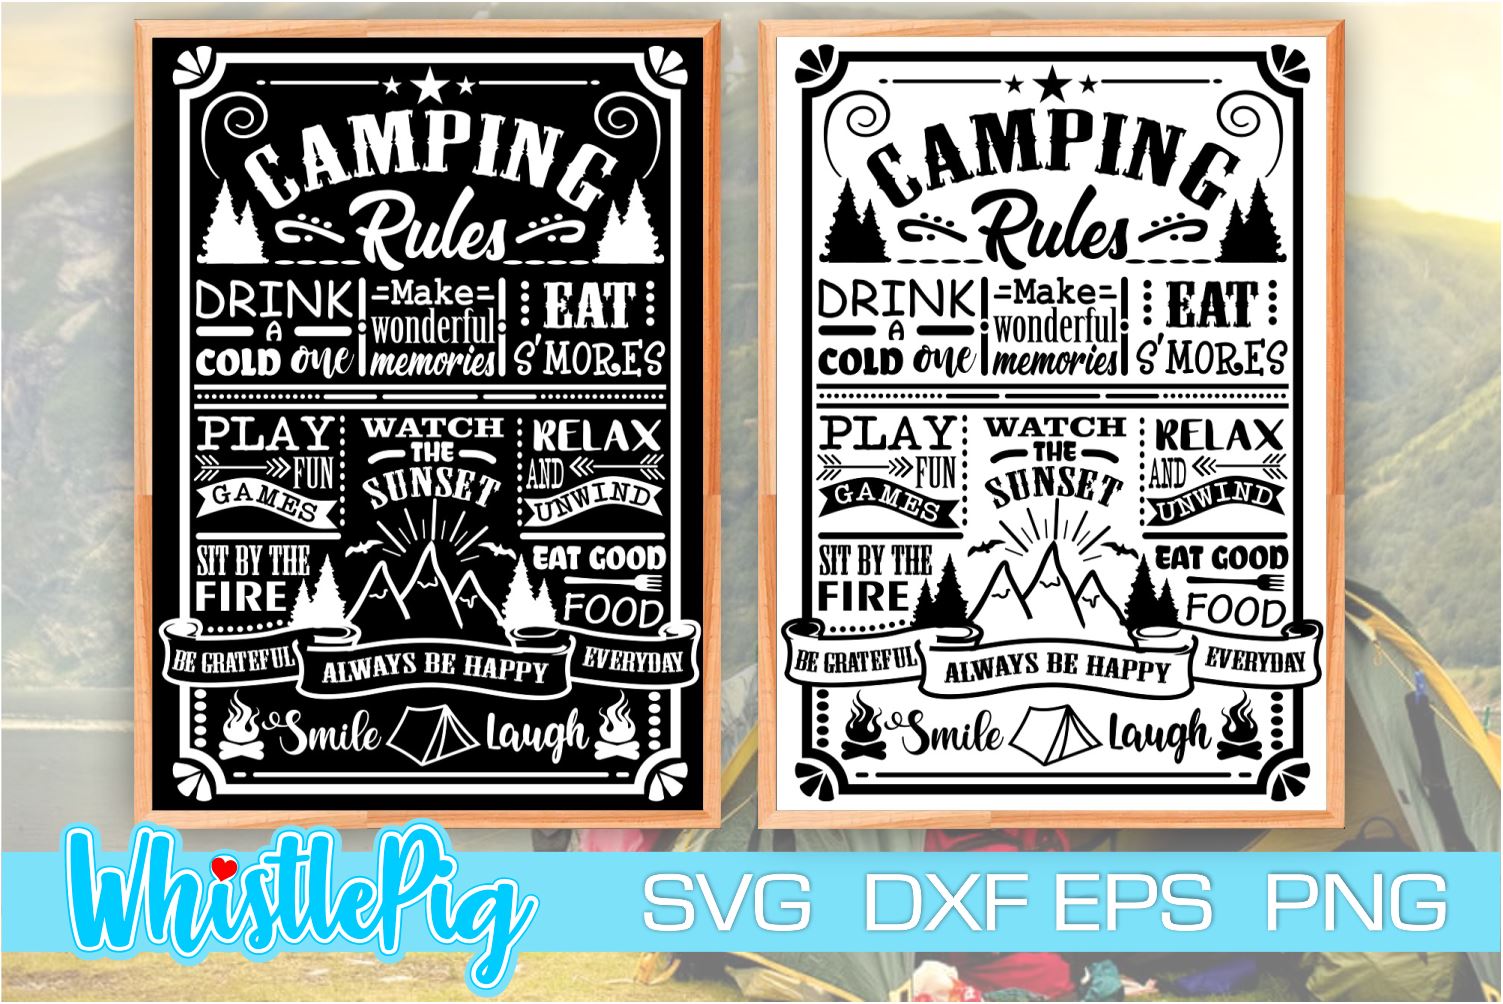 Download Camping Svg Camping Rules Svg Camp Rules Svg Camper Svg Camper Rules S So Fontsy